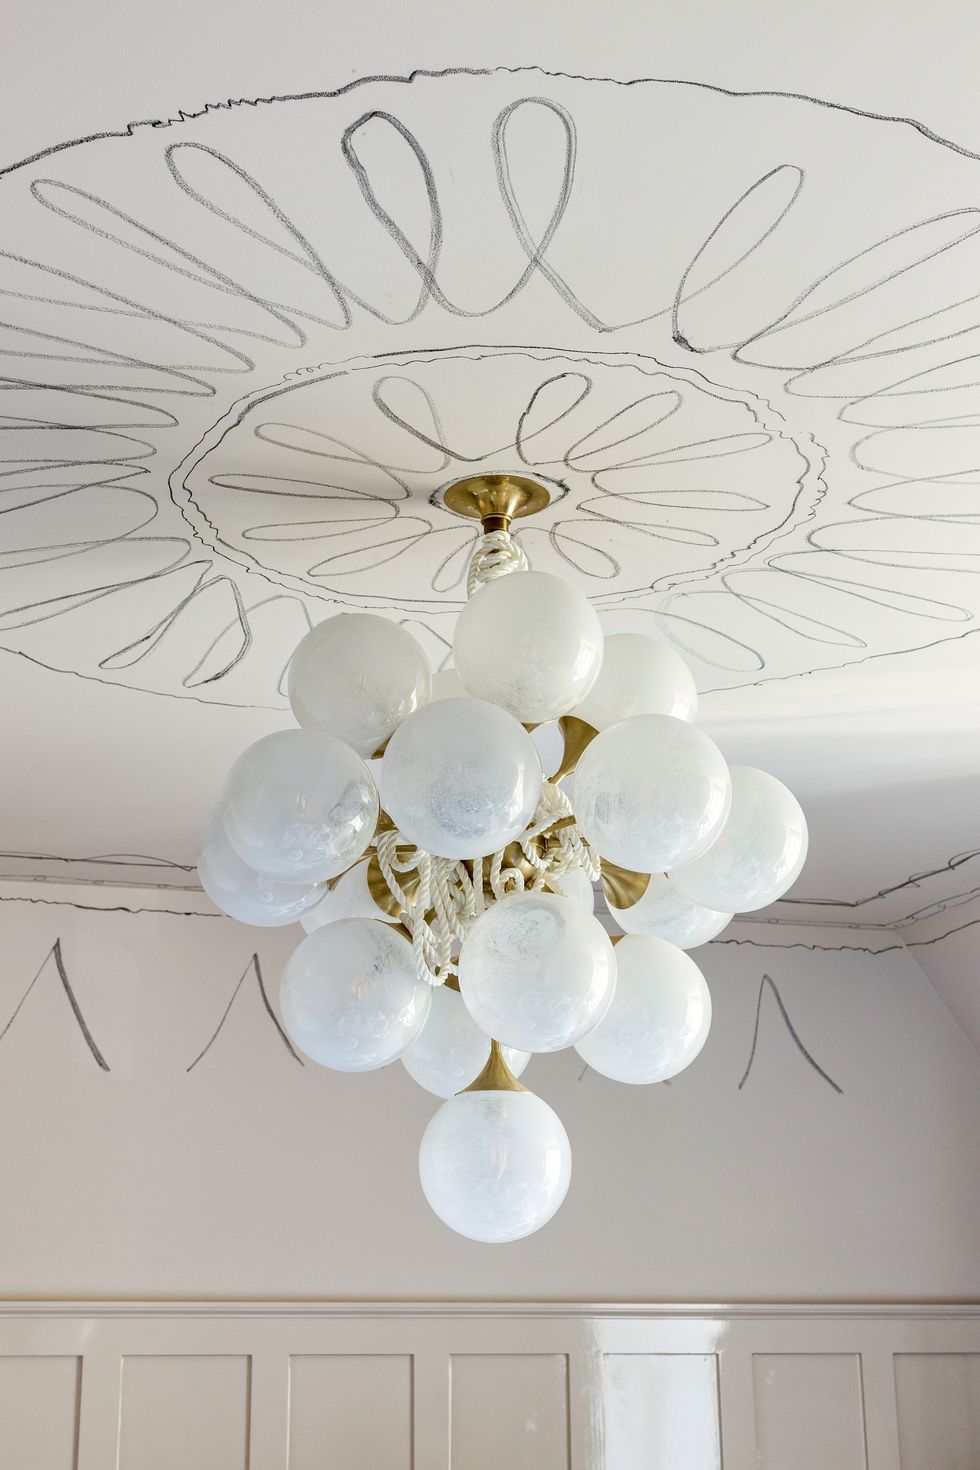 chandelier and ceiling illustration